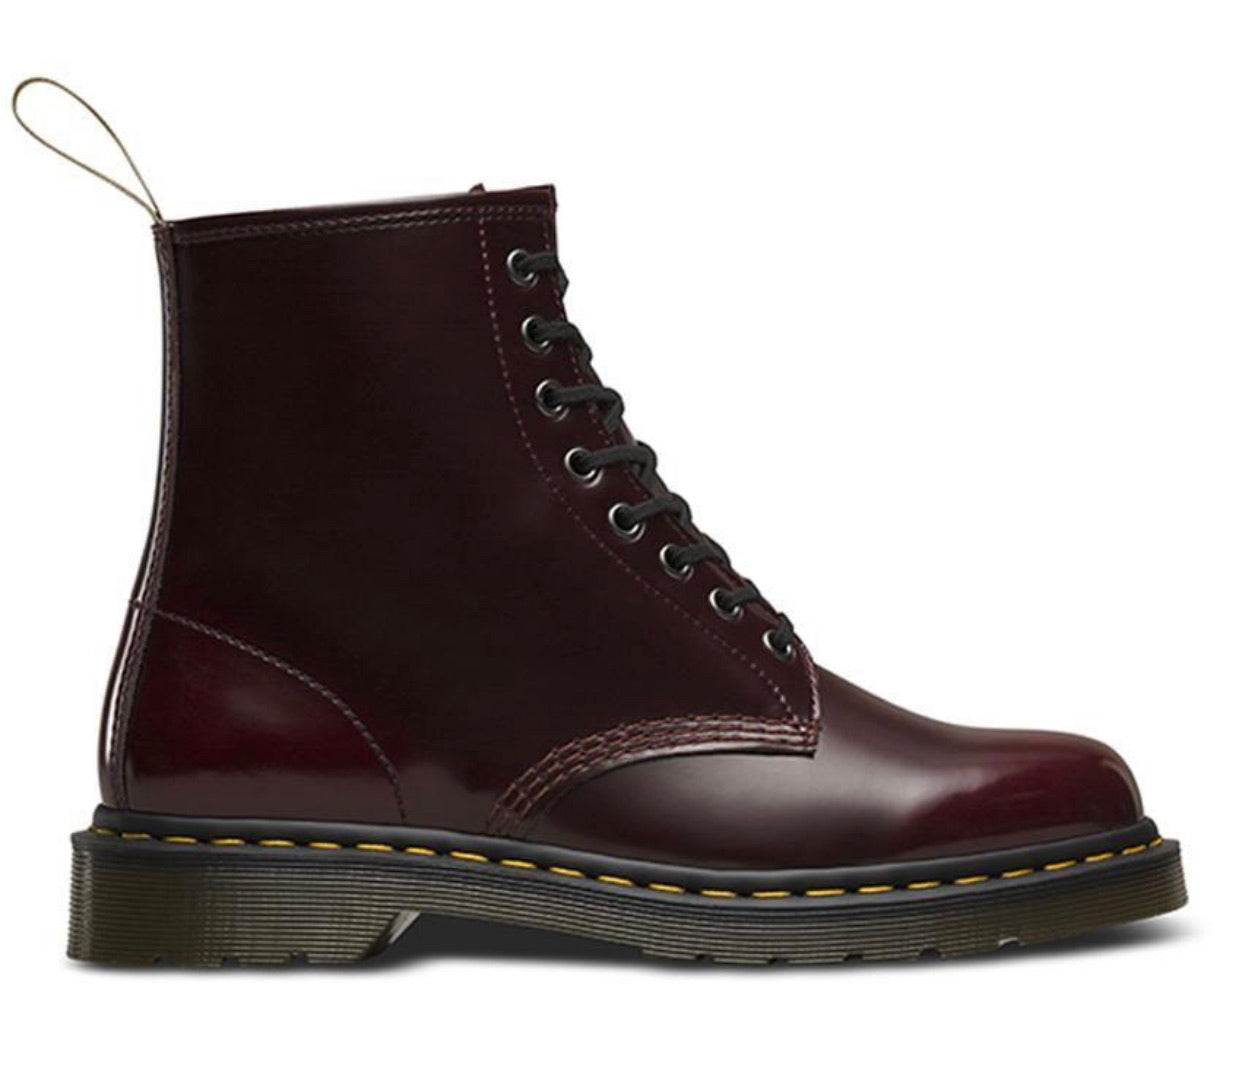 Dr. Martens 1460 Cherry Red Oxford Rub Off Vegan Ankle 8 Eyelet Boot